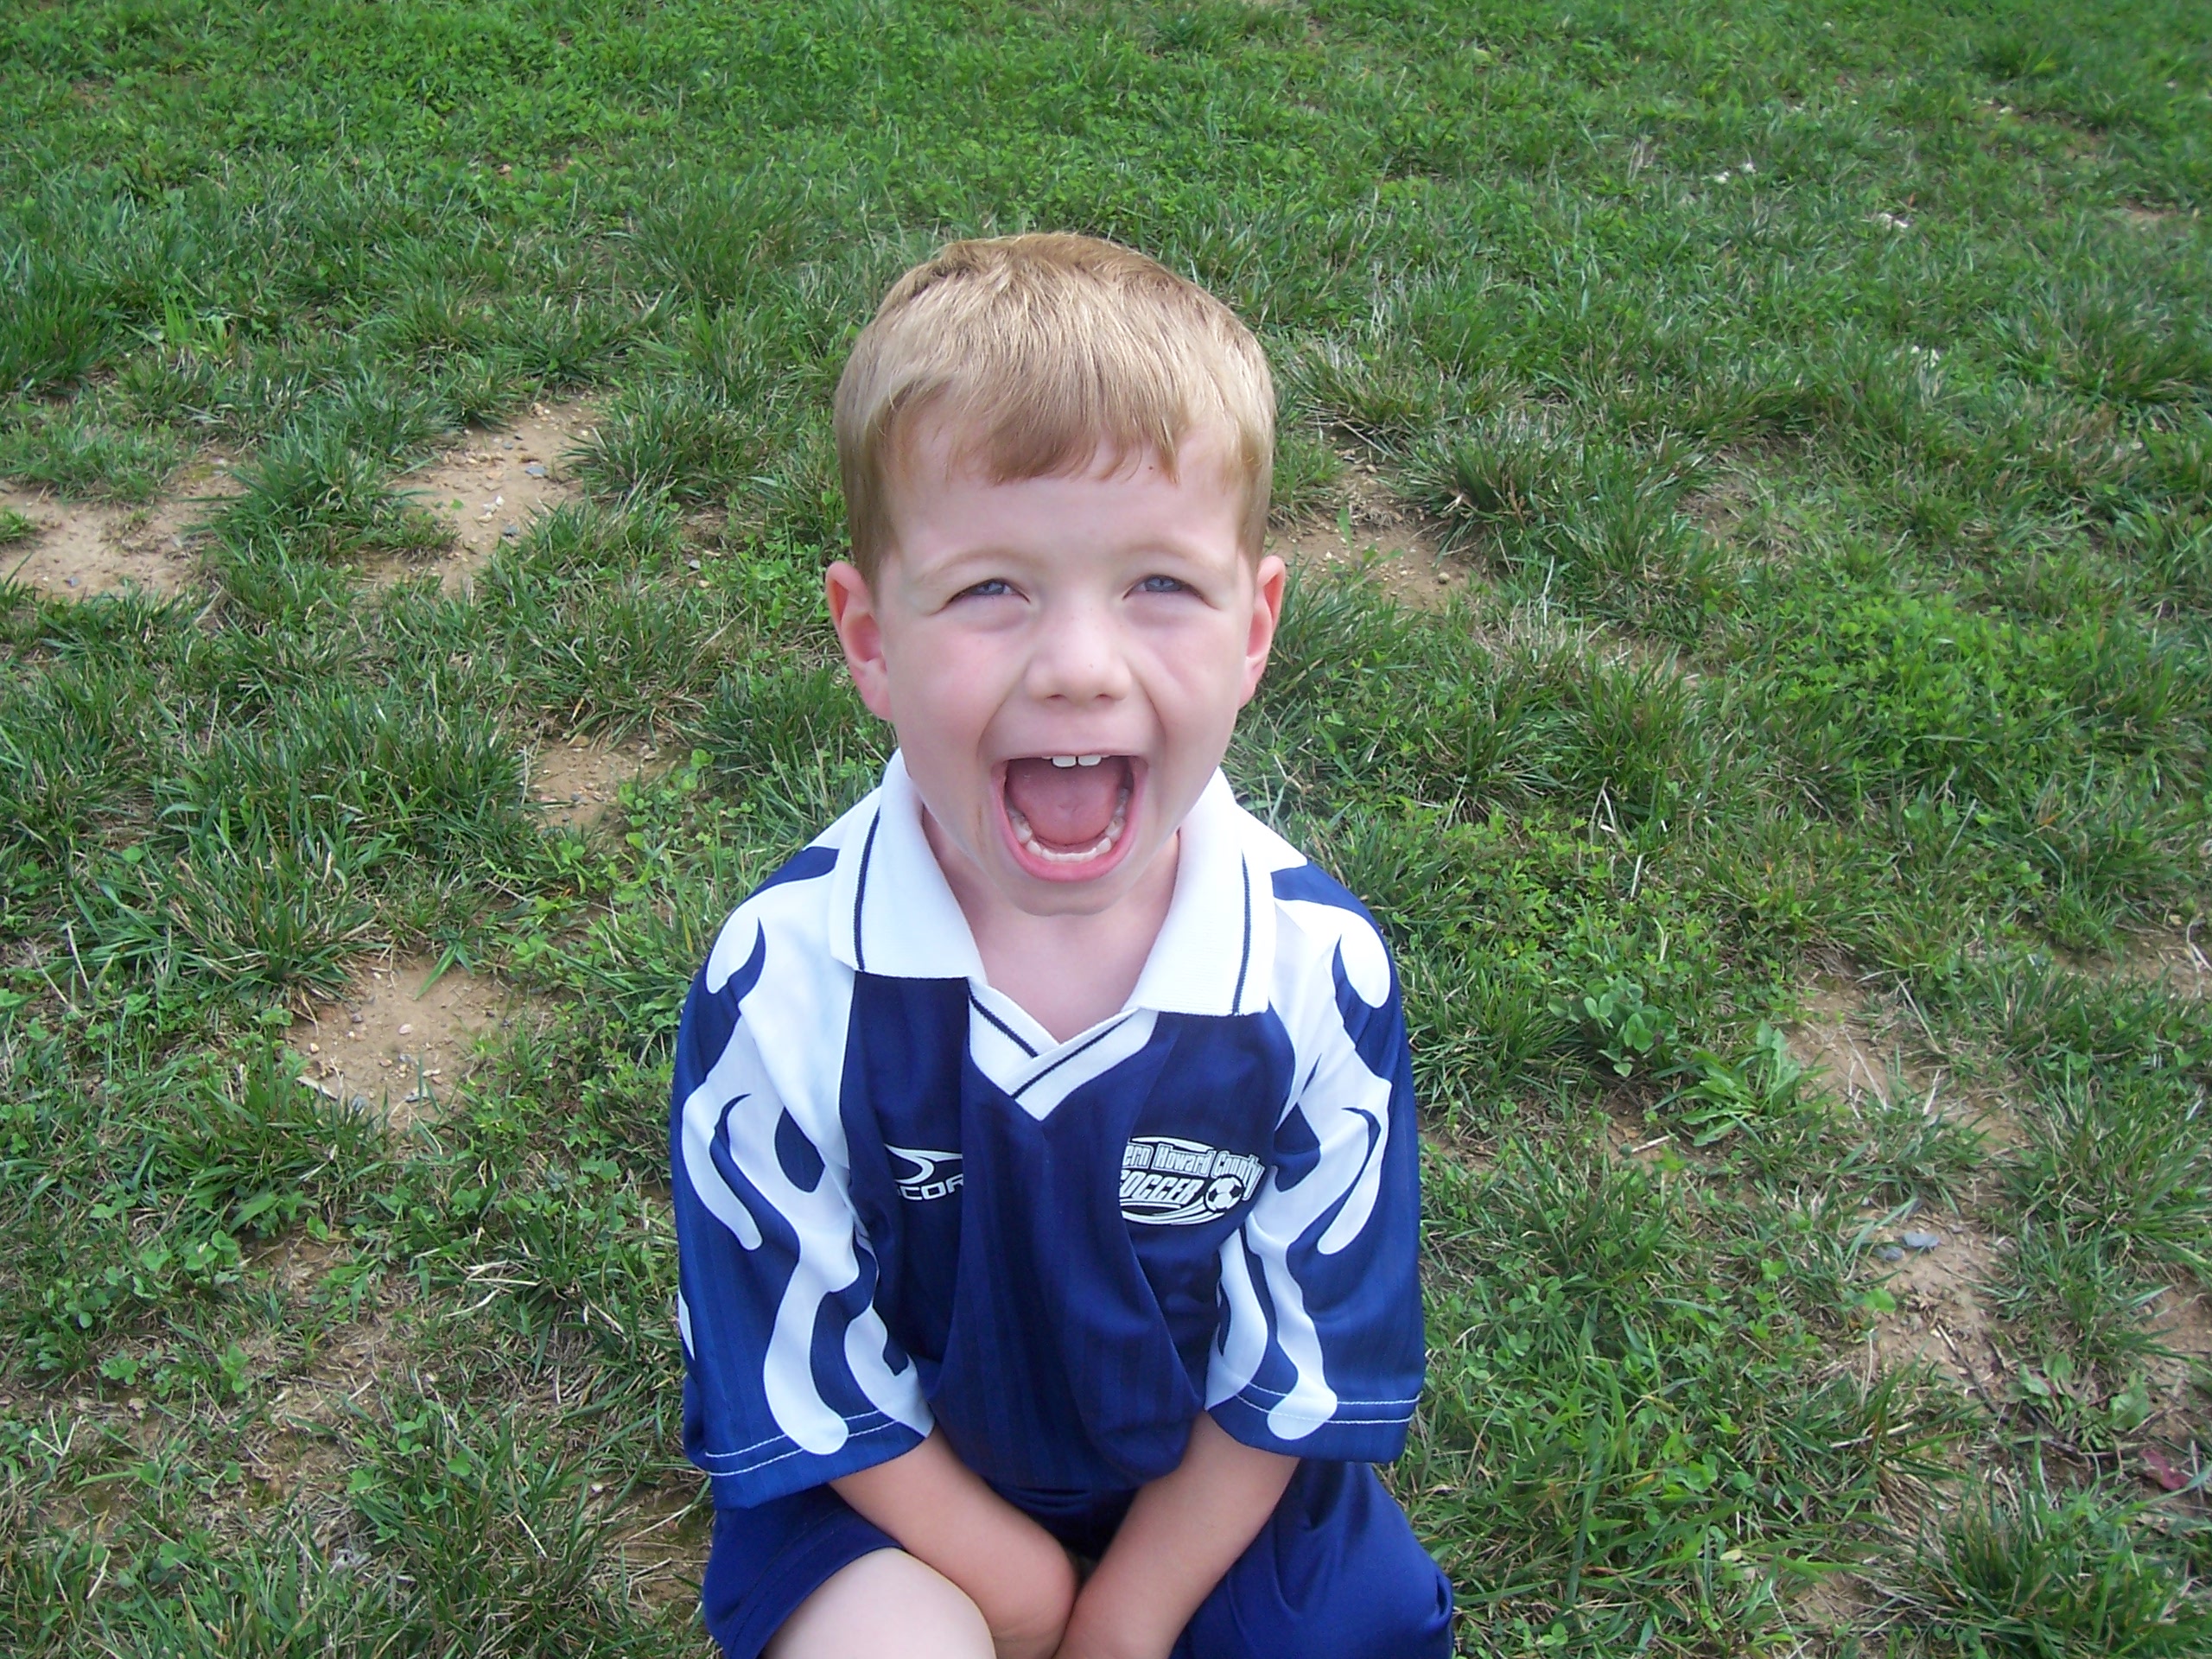 Happy younger sibling on the sideline of big sibling's youth soccer team game! Kid is wearing an old soccer jersey as well! Kid can't wait for his turn to play soccer!